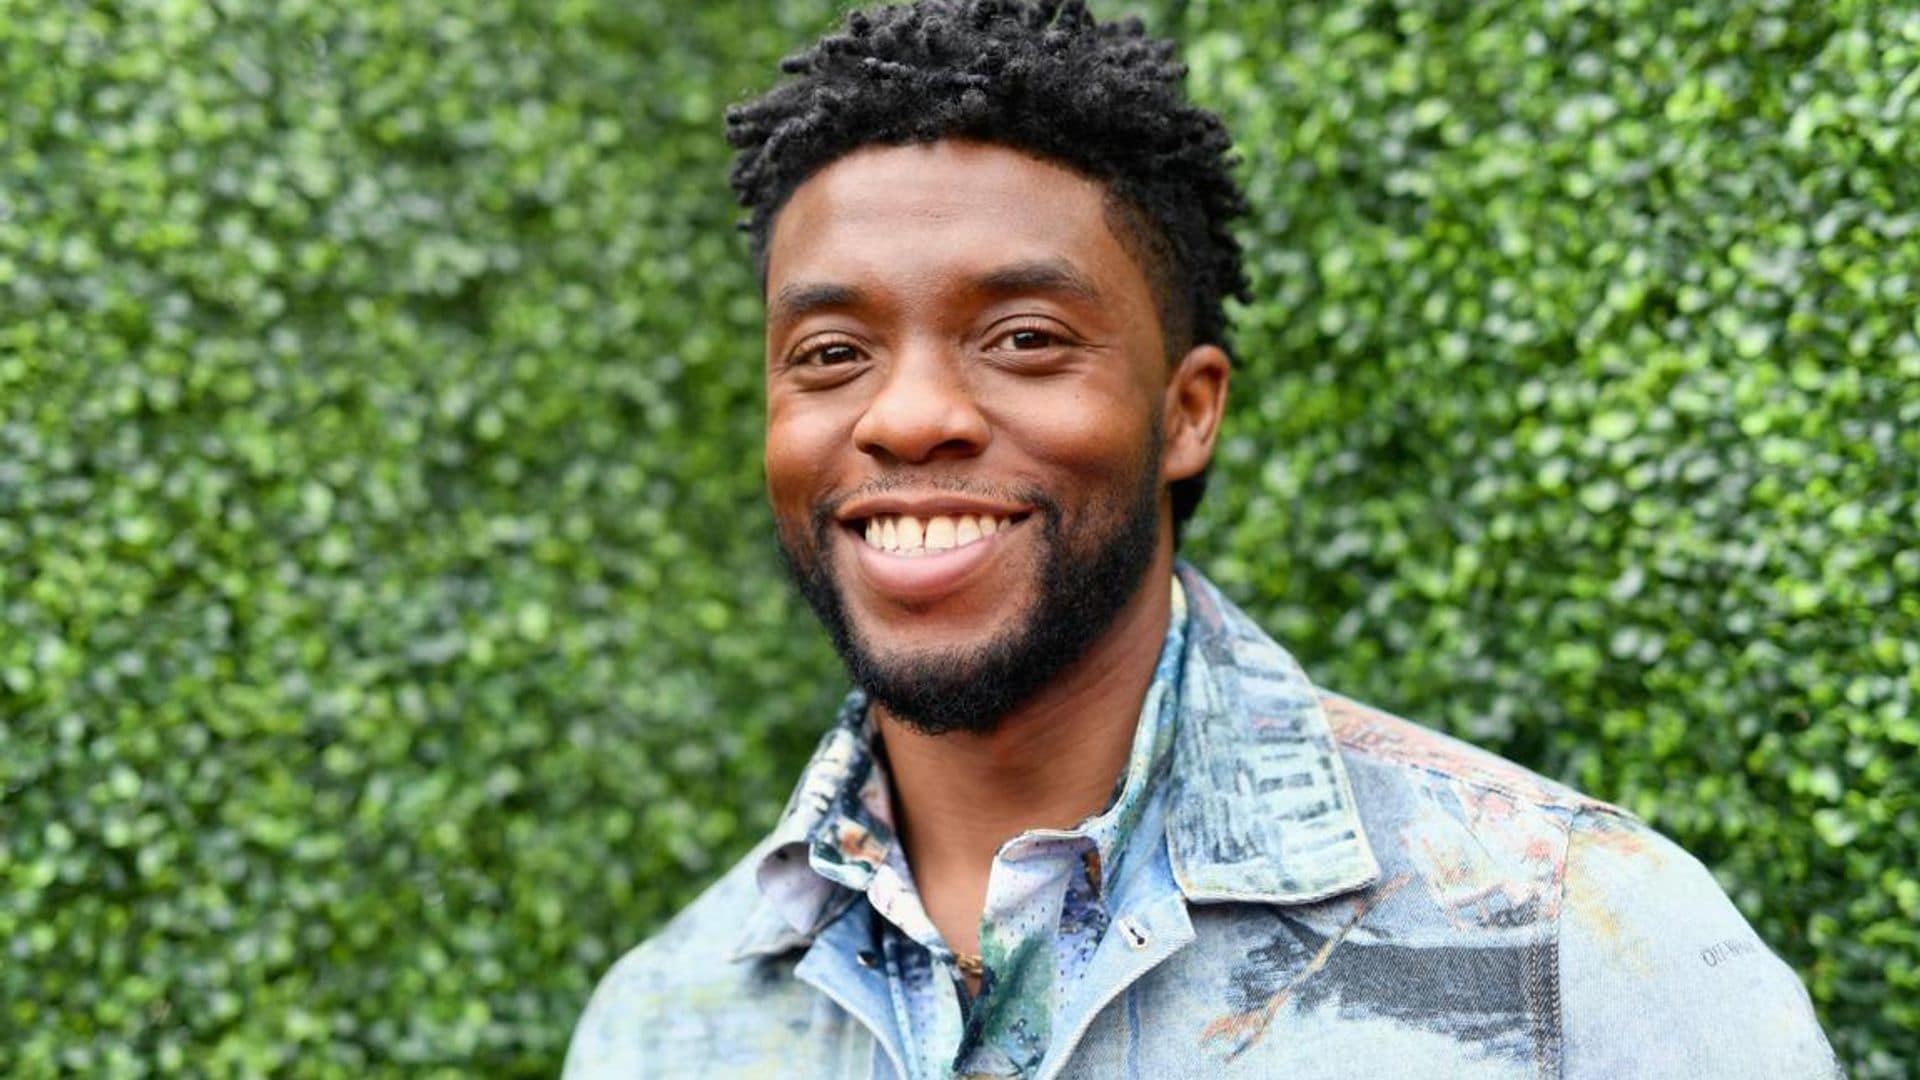 Chadwick Boseman’s unforgettable act of kindness at a bookstore goes viral